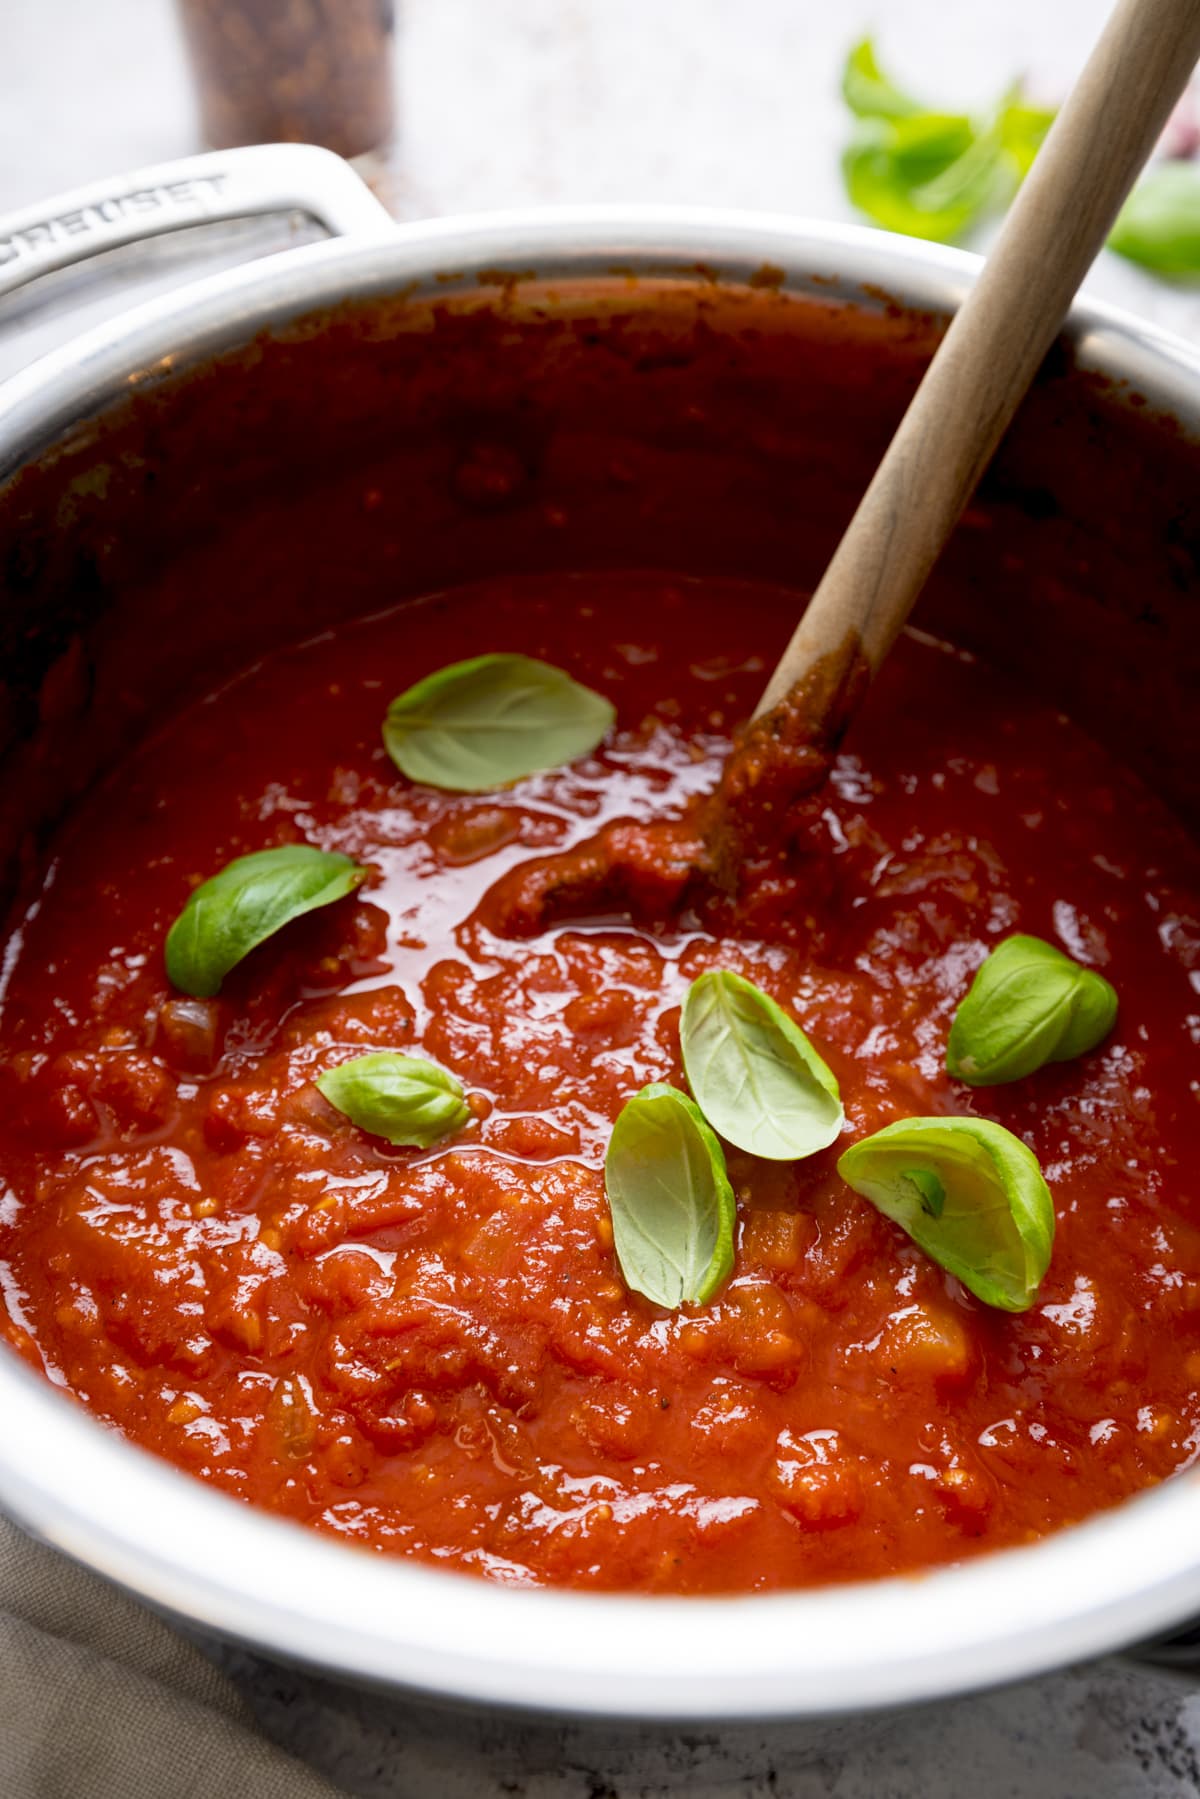 Close-up of a silver pan with Arrabbiata sauce on a light background.  There is a cooking spoon and fresh basil leaves sprinkled into the sauce.